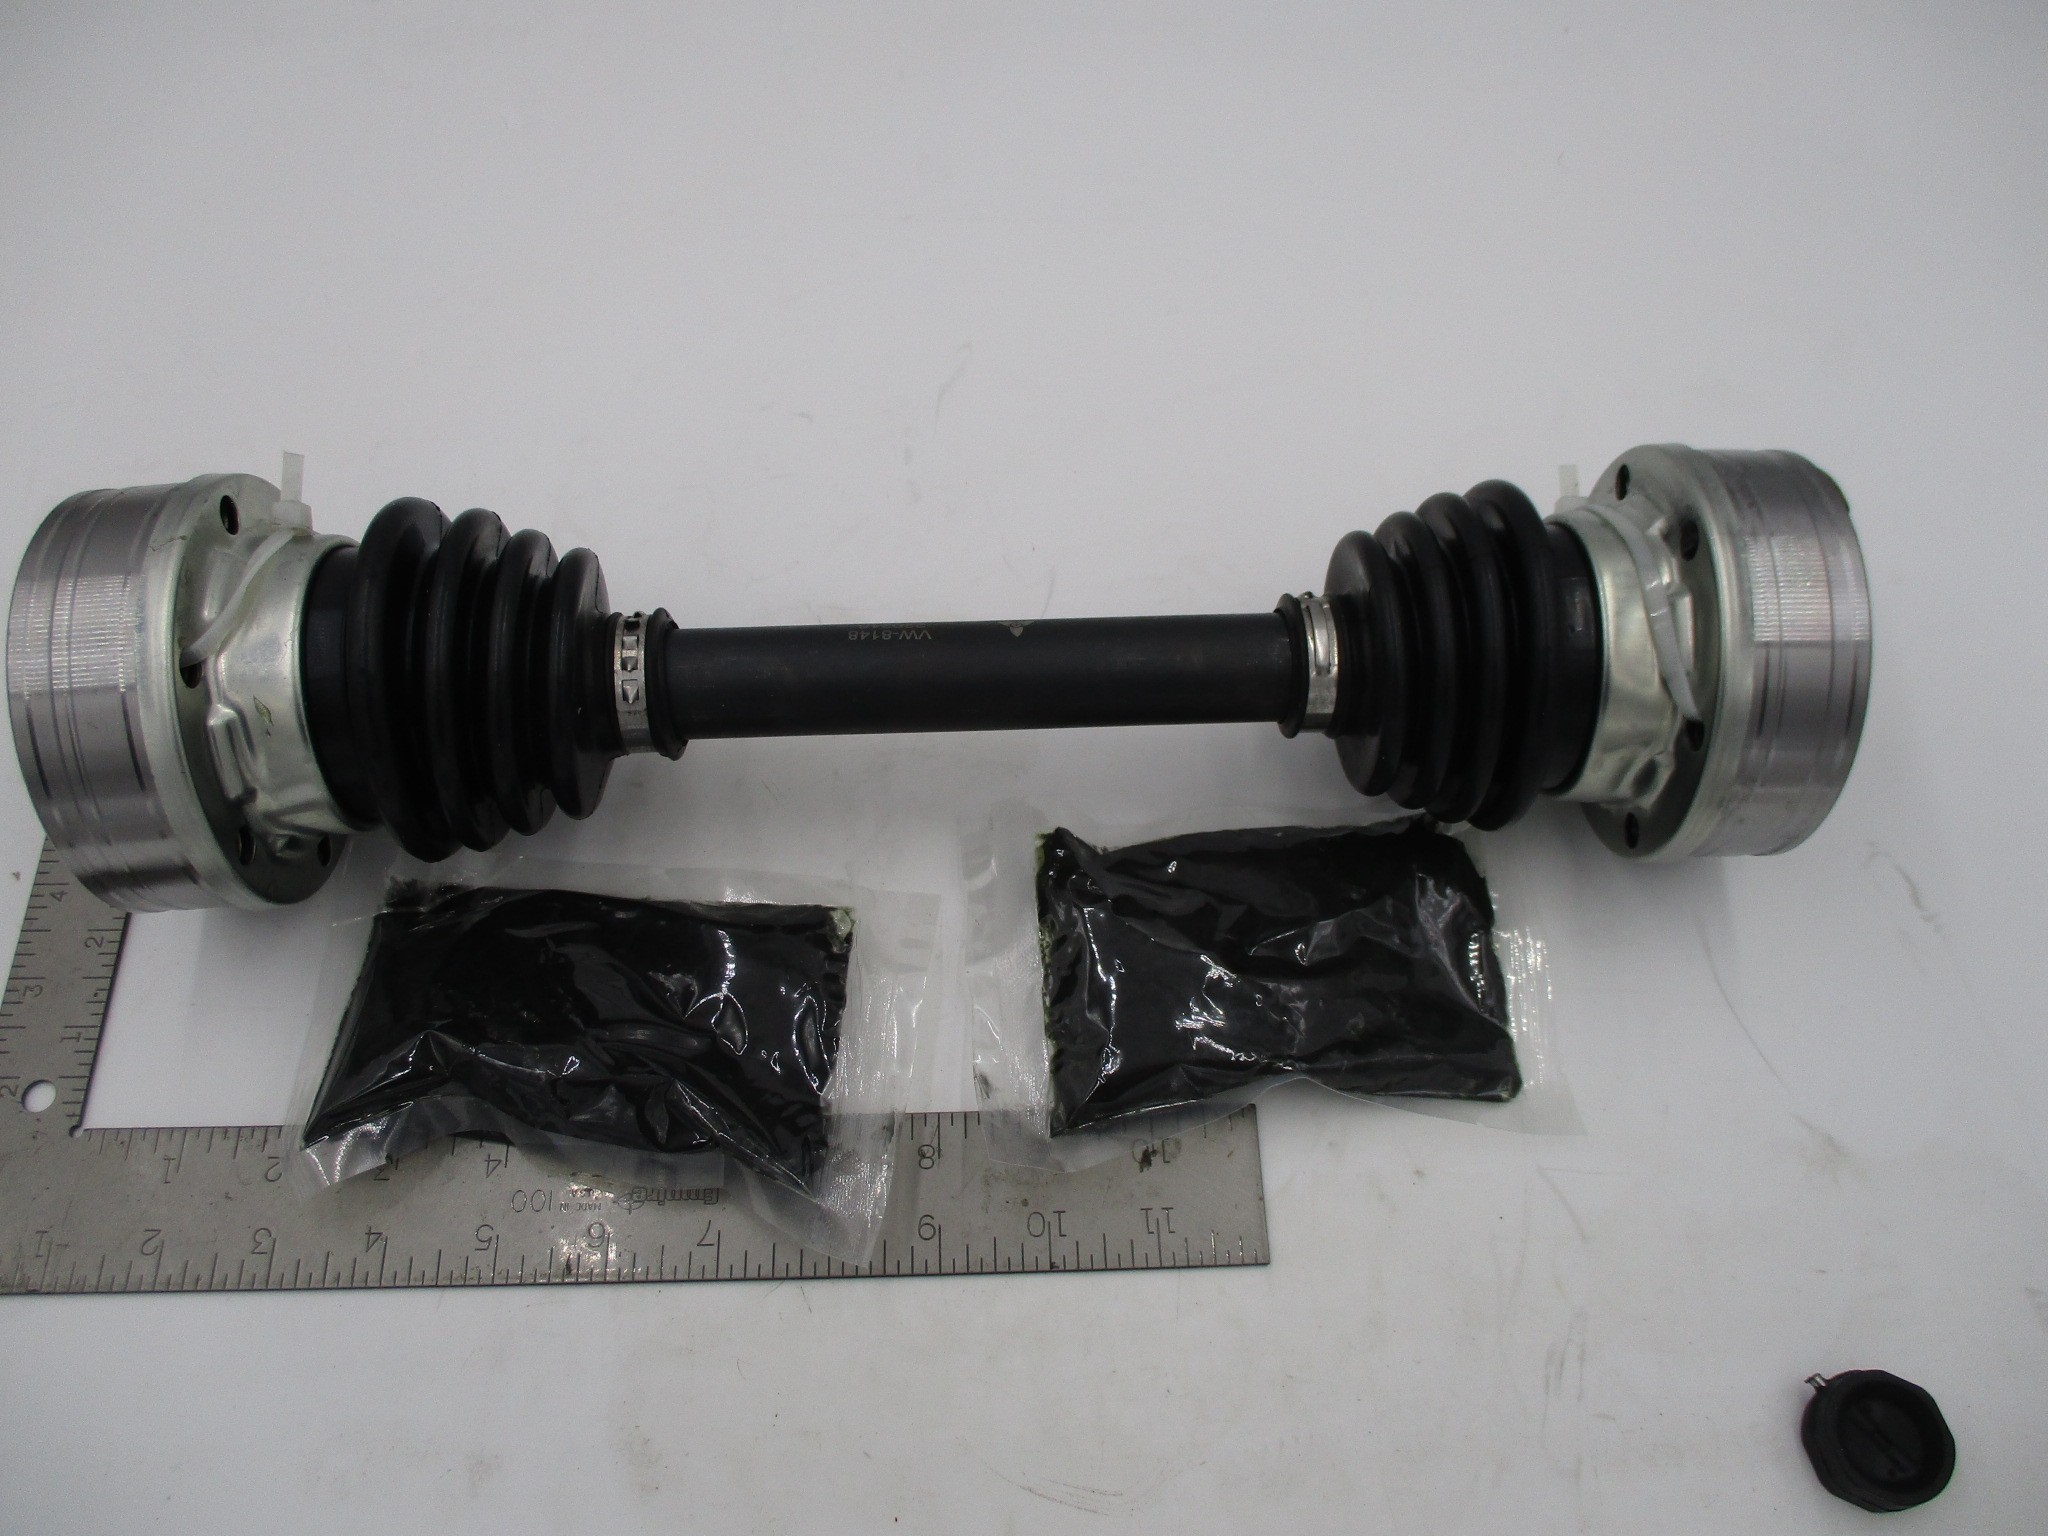 Axle rear 82 to 85/1 5 speed Brand new 